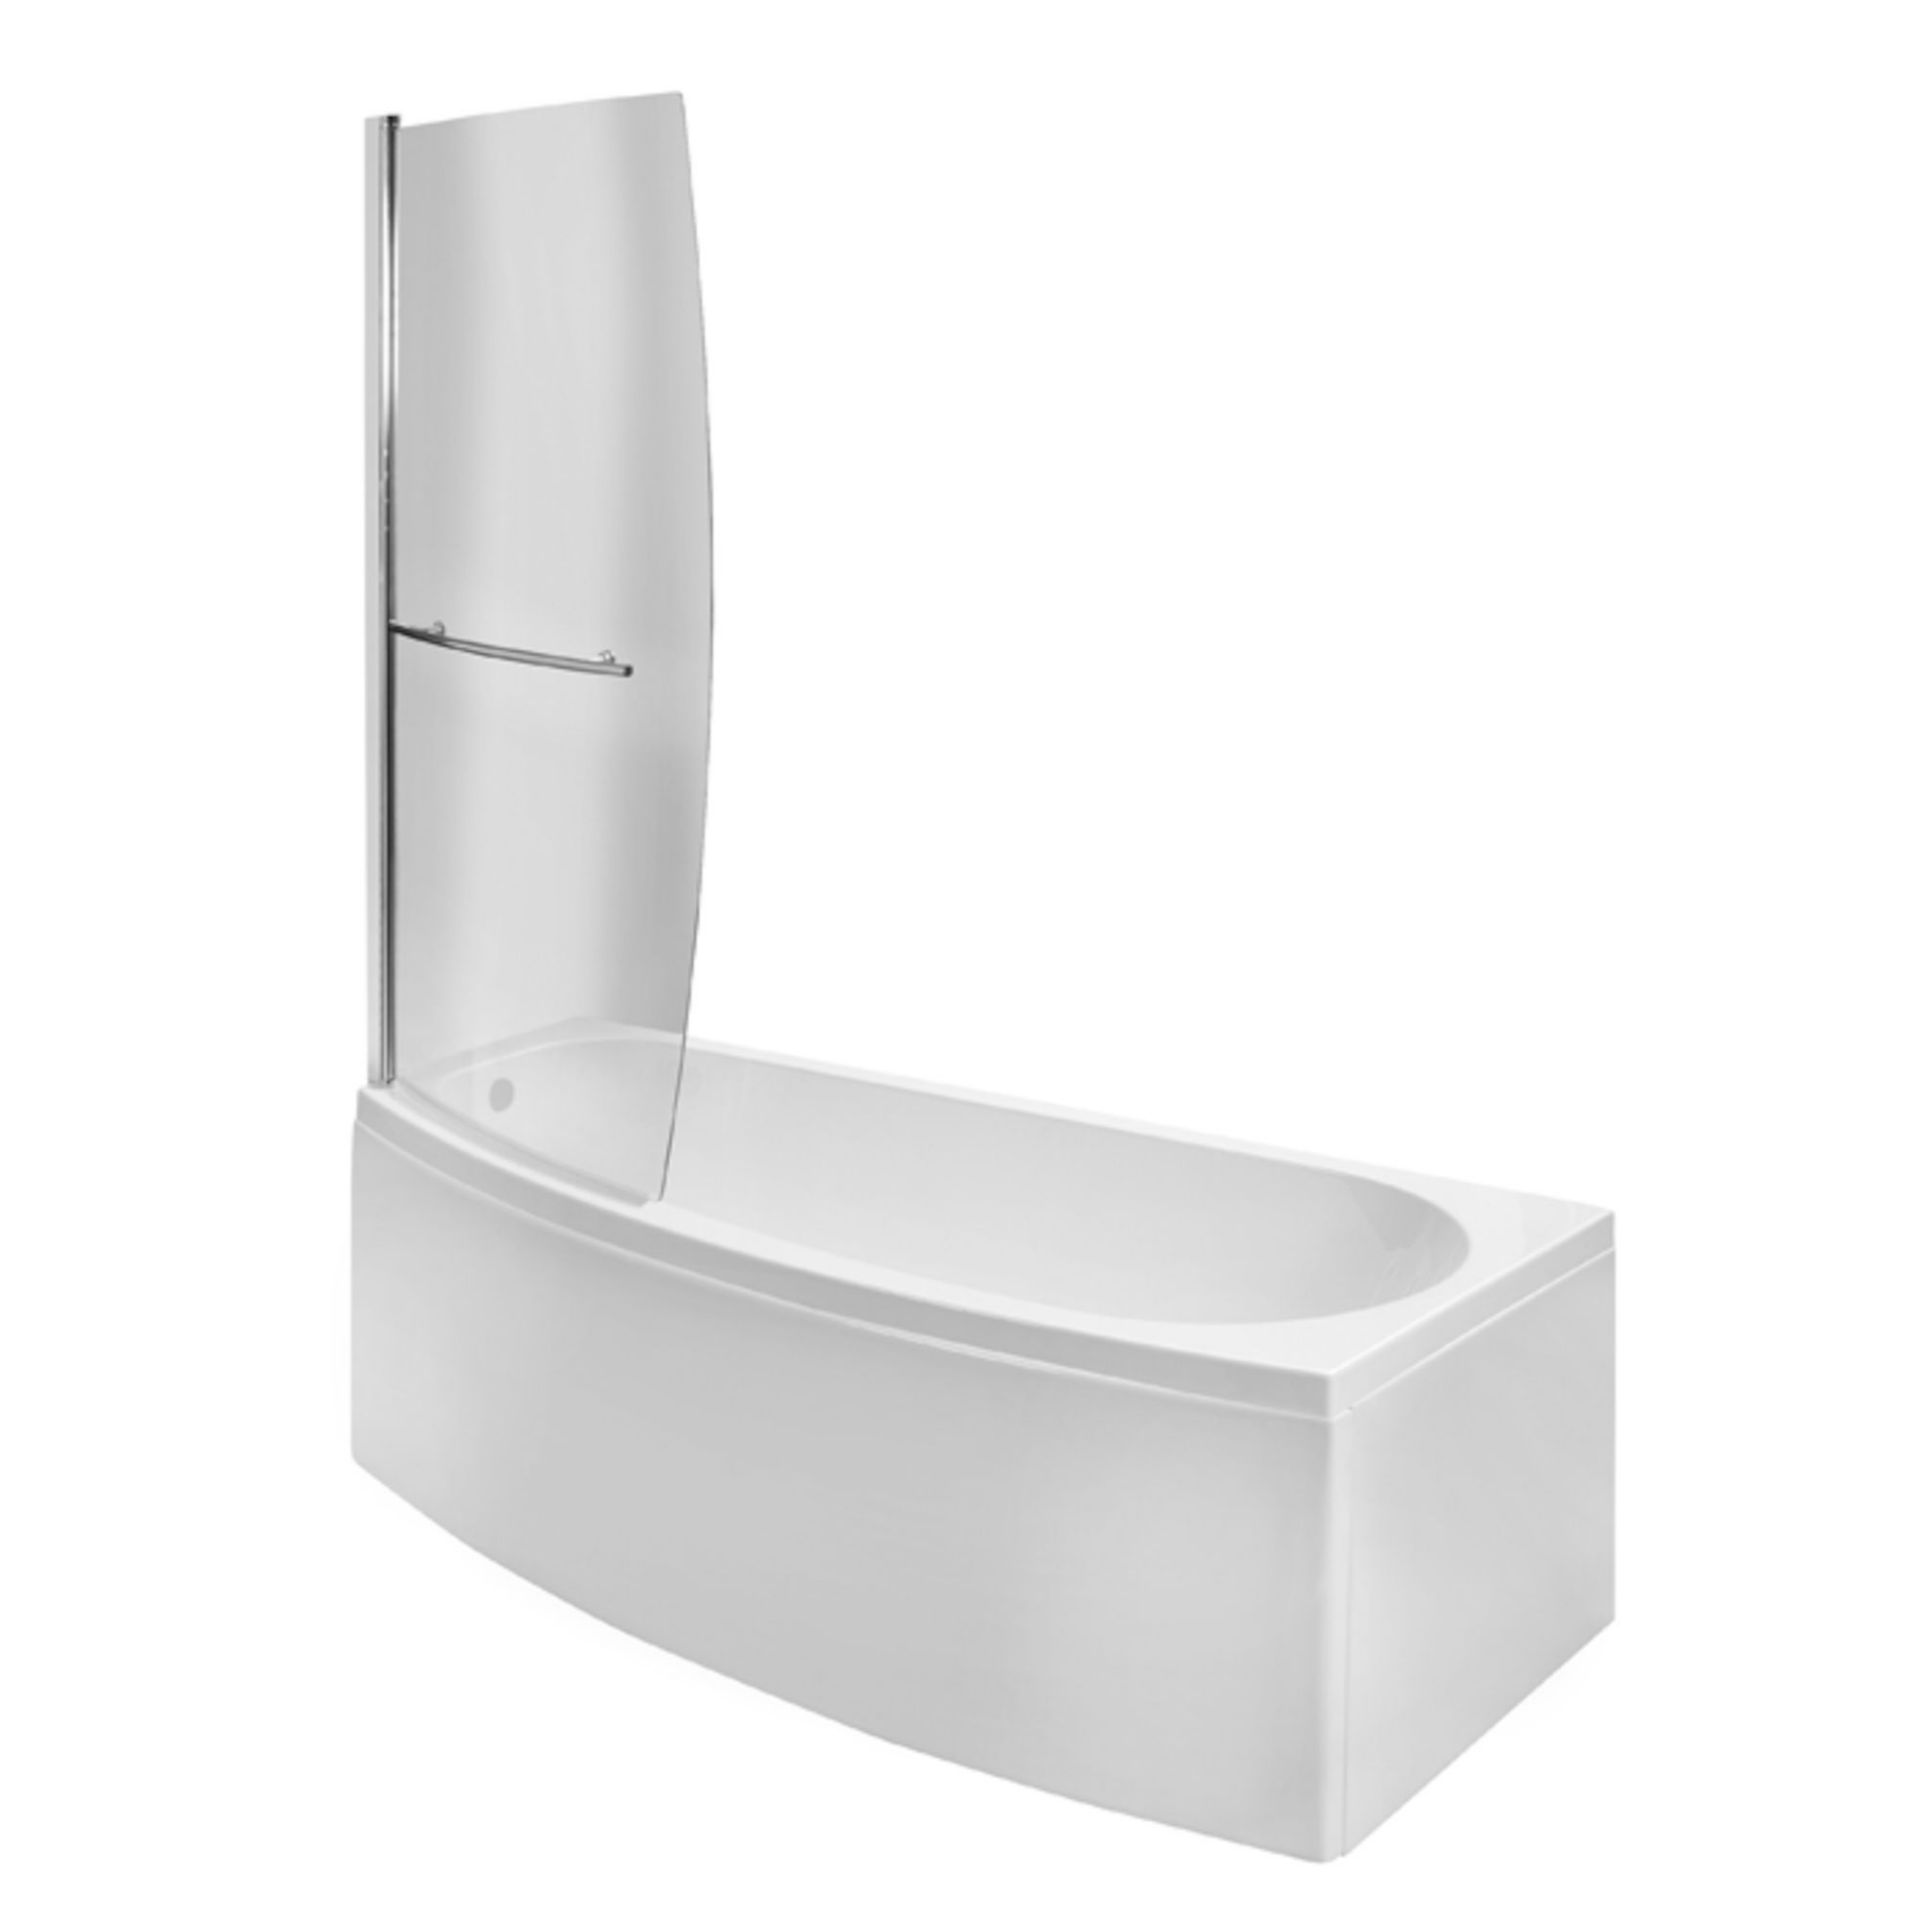 (KL192) 1700mm Left Hand Space Saver Shower Bath Screen Rail & Front Panel (Excludes End Panel). - Image 2 of 3